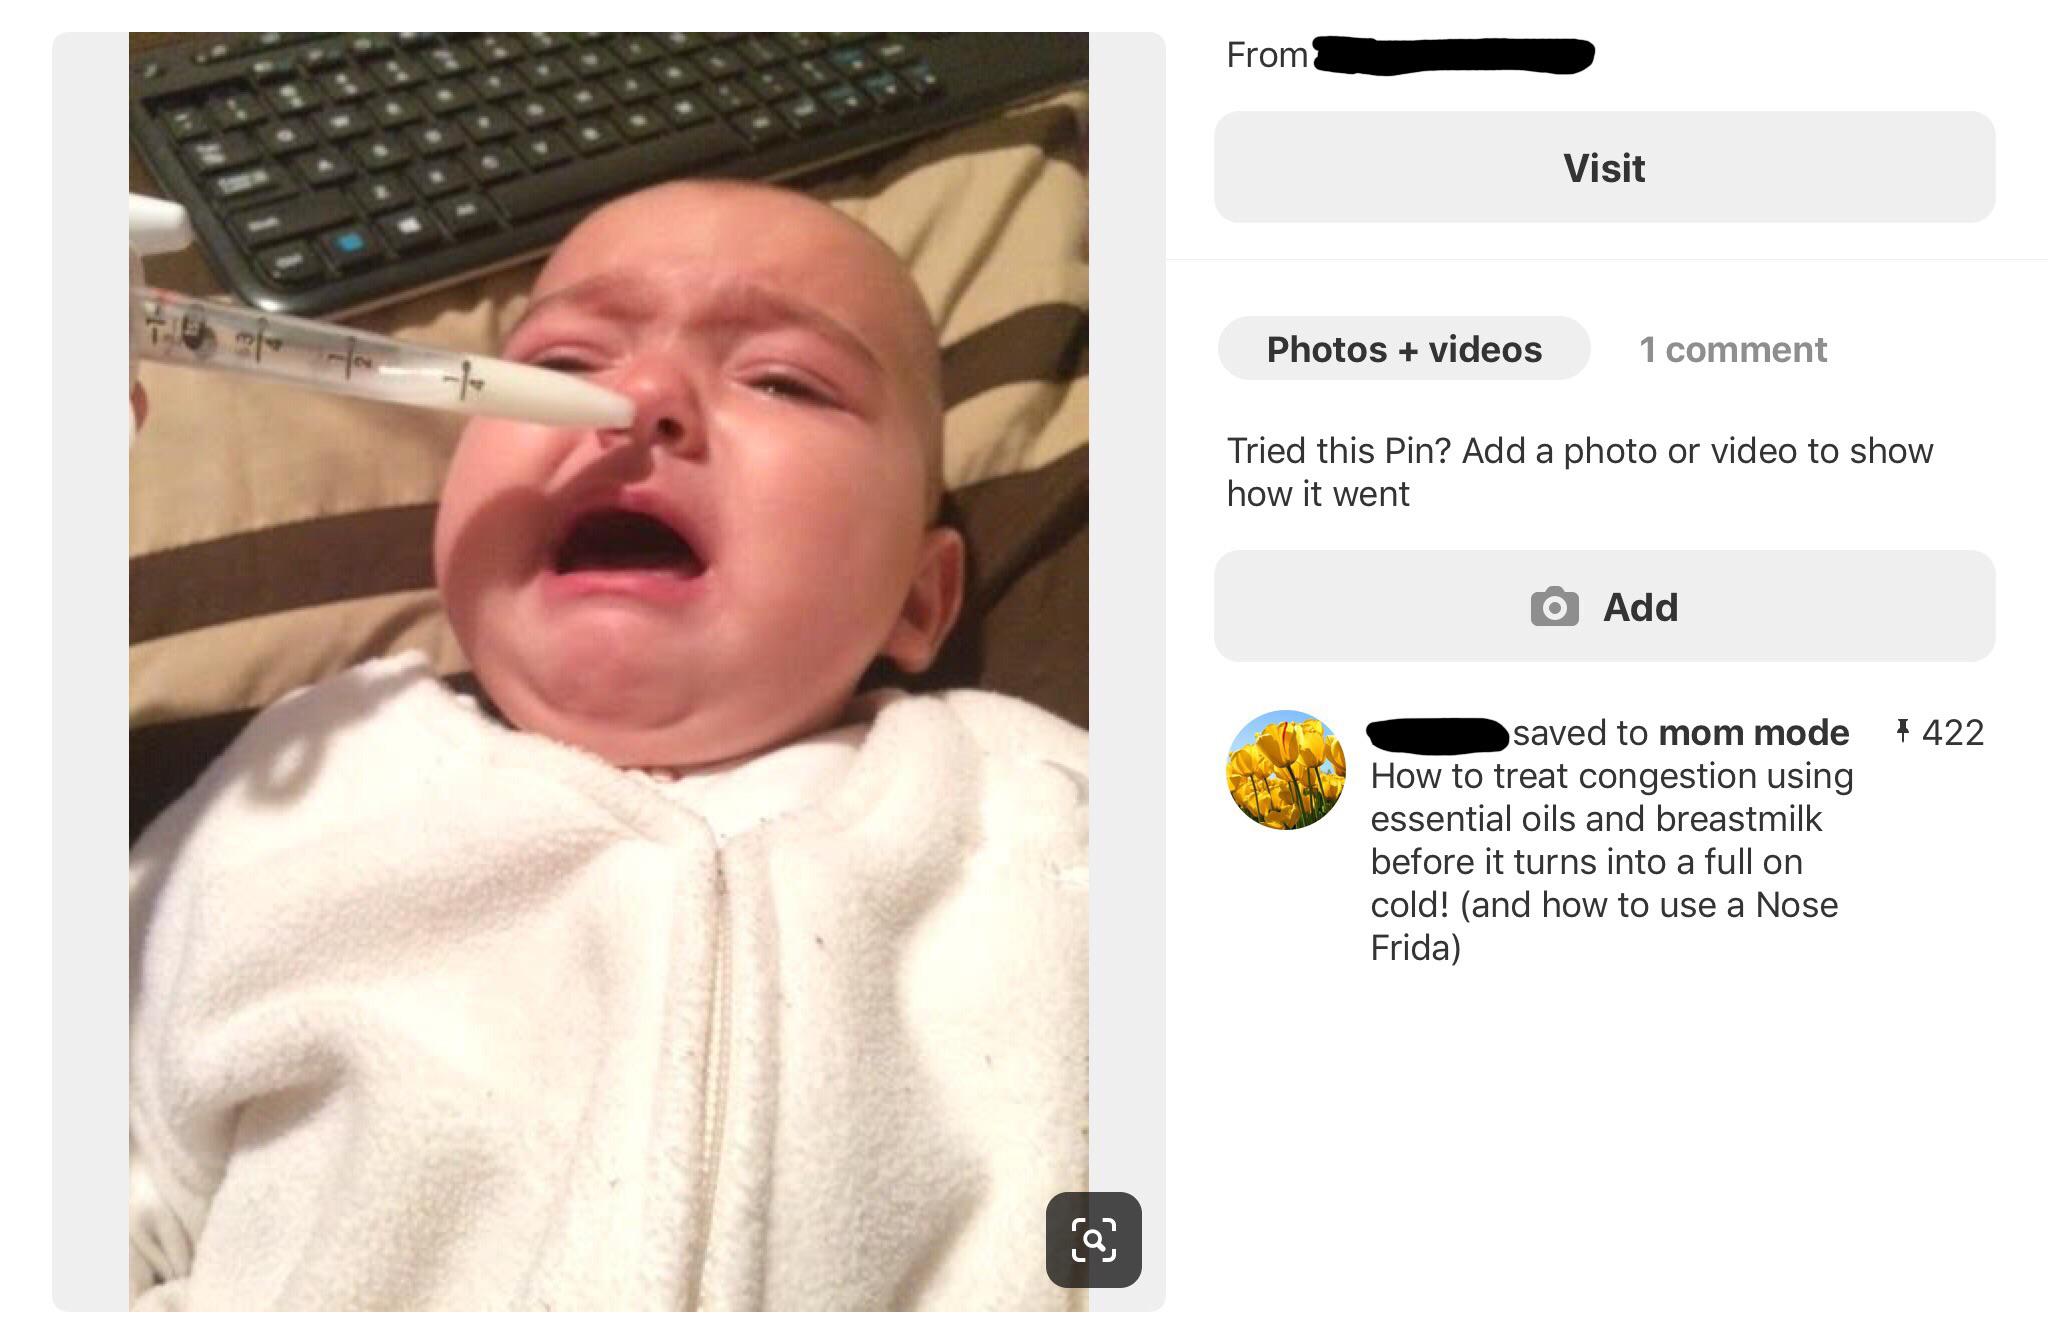 breast milk in nose for congestion in babies - From Visit Photos videos 1 comment Tried this Pin? Add a photo or video to show how it went O Add saved to mom mode 1422 How to treat congestion using essential oils and breastmilk before it turns into a full